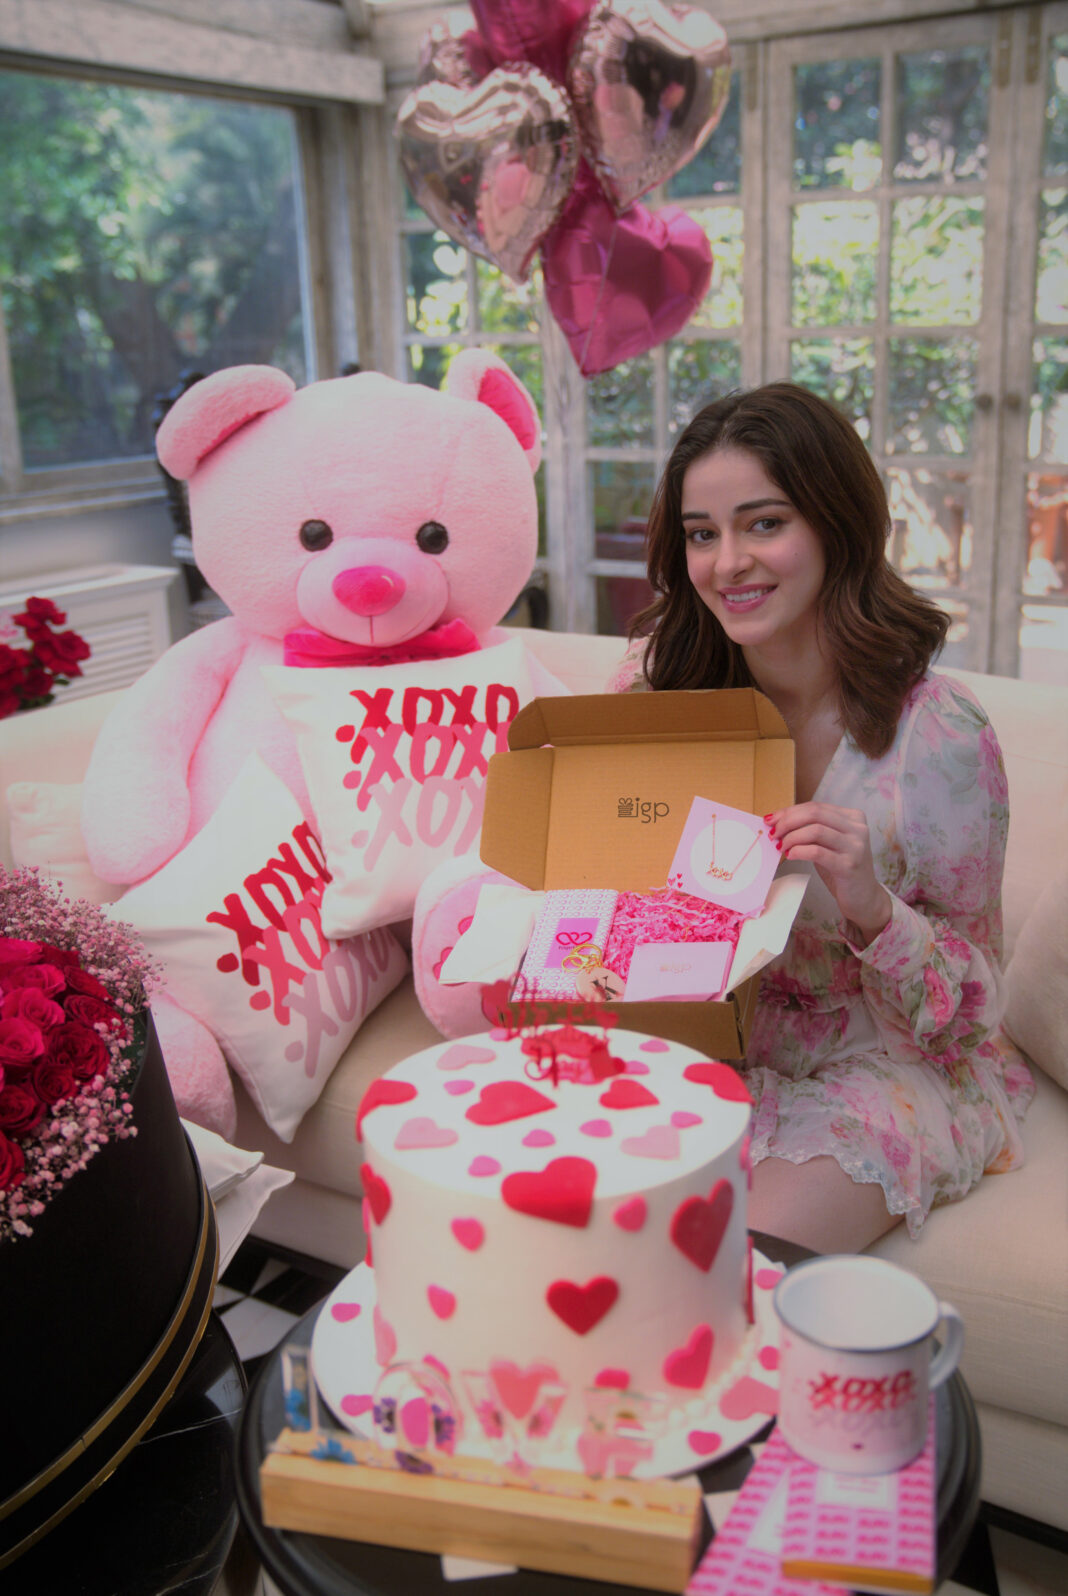 Bollywood actress Ananya Panday has collaborated with IGP.com